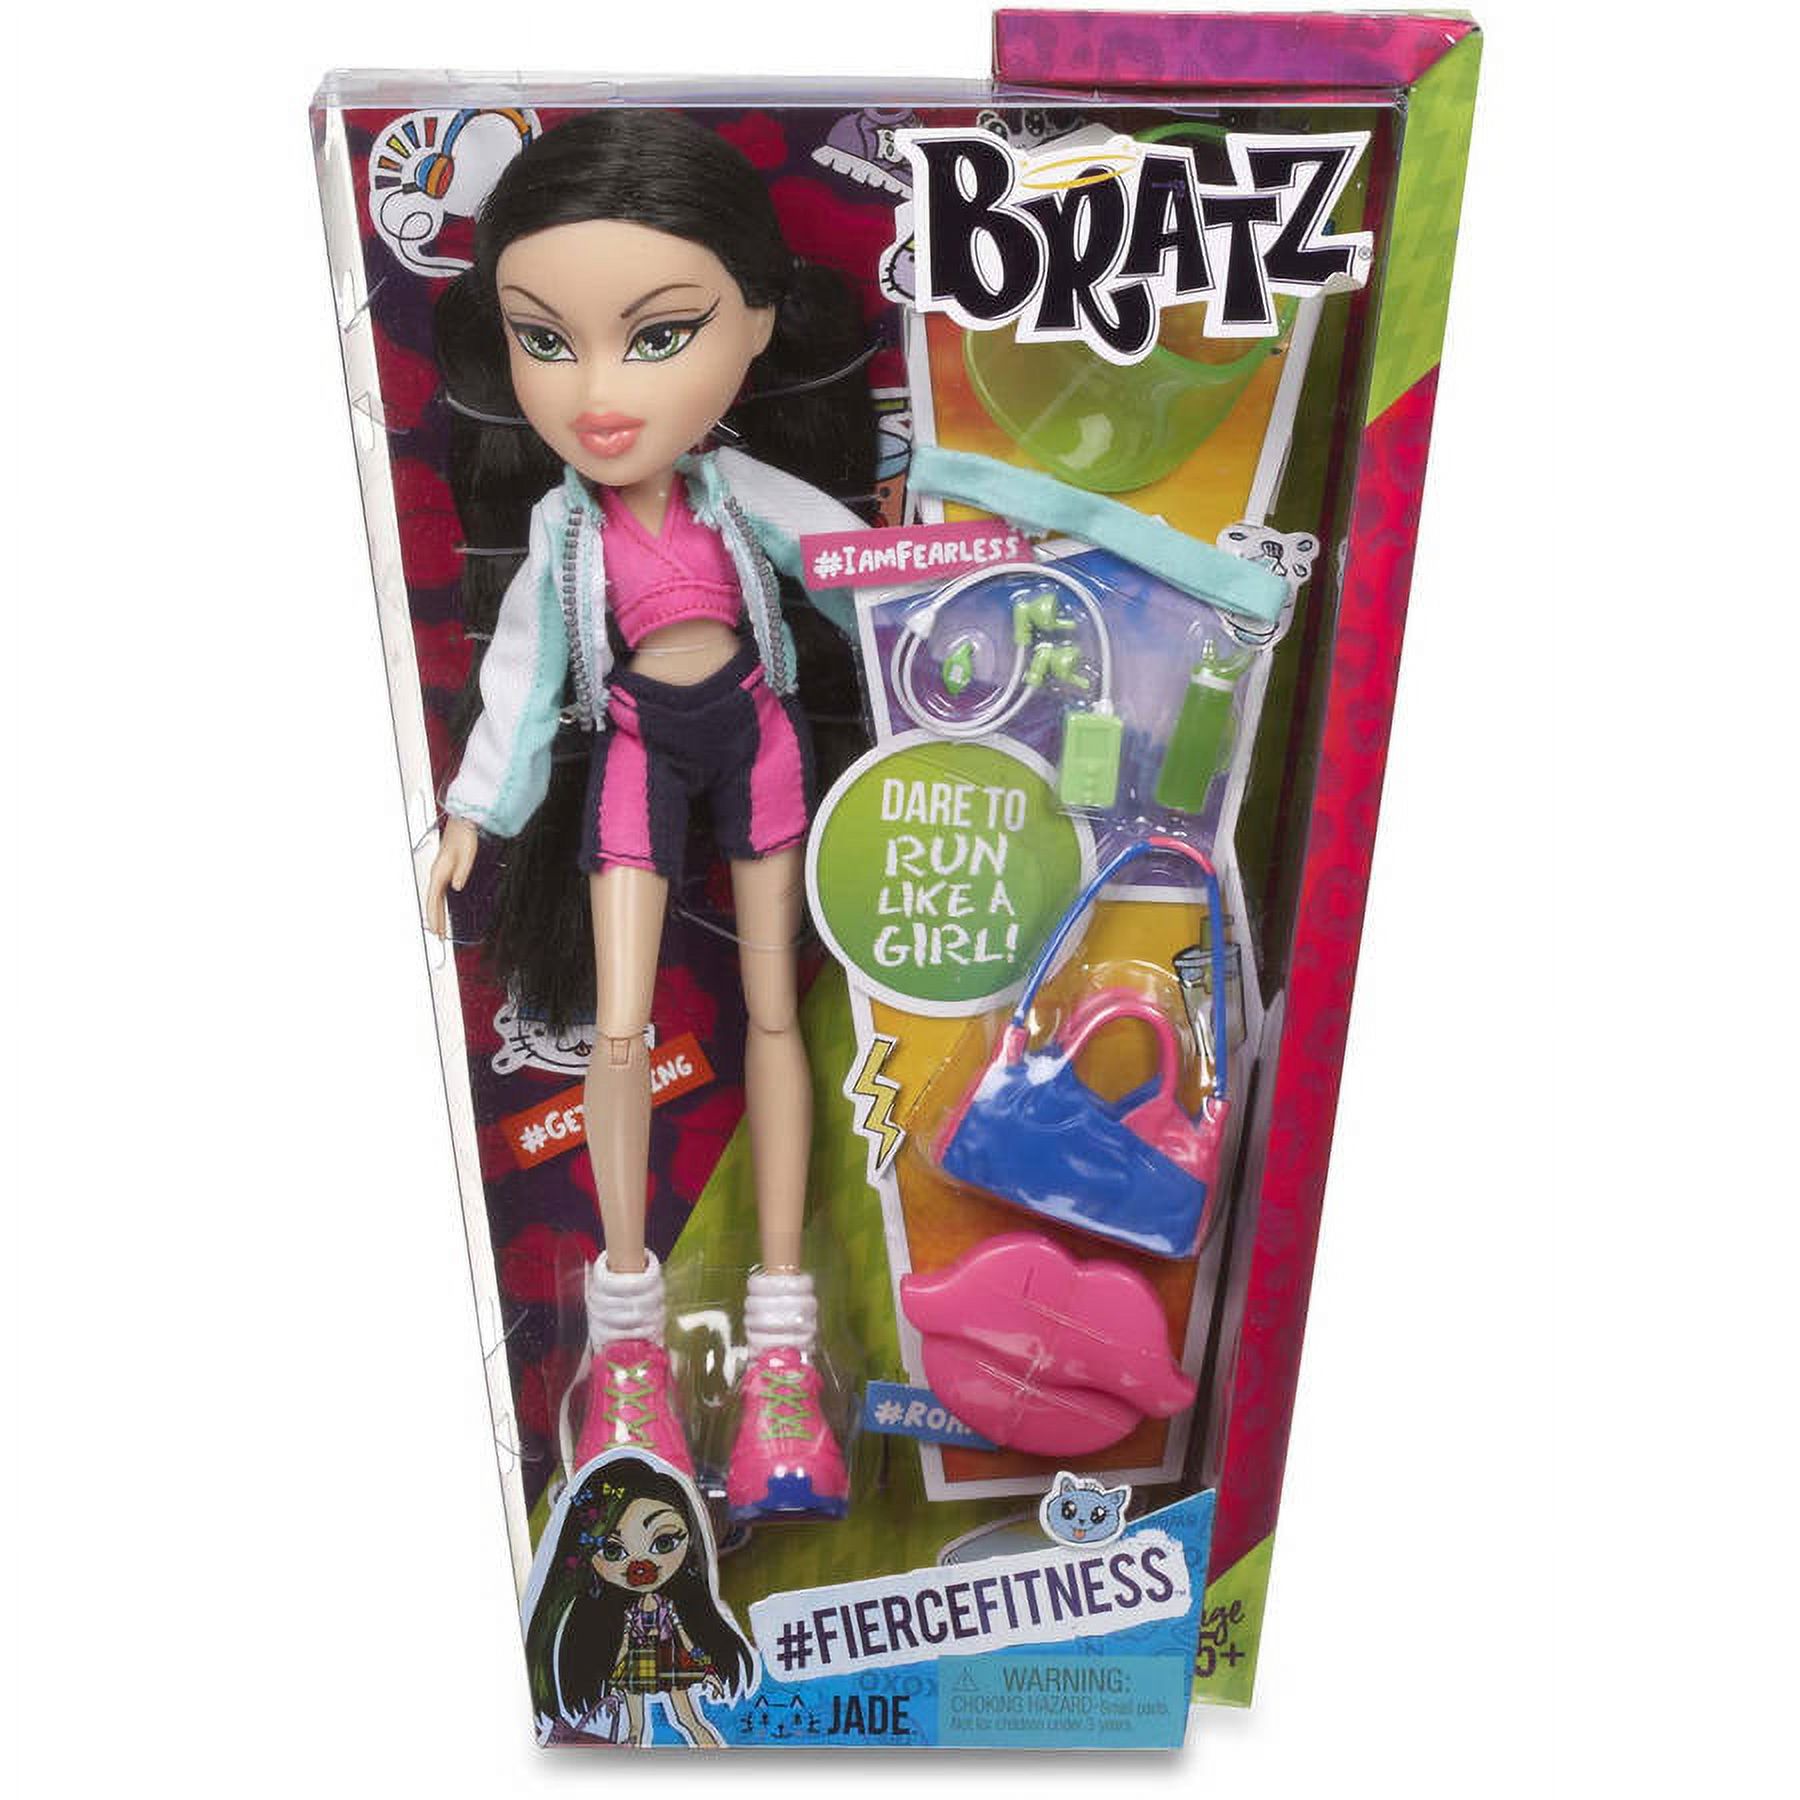 Bratz Fierce Fitness Doll, Jade, Great Gift for Children Ages 6, 7, 8+ - image 4 of 5